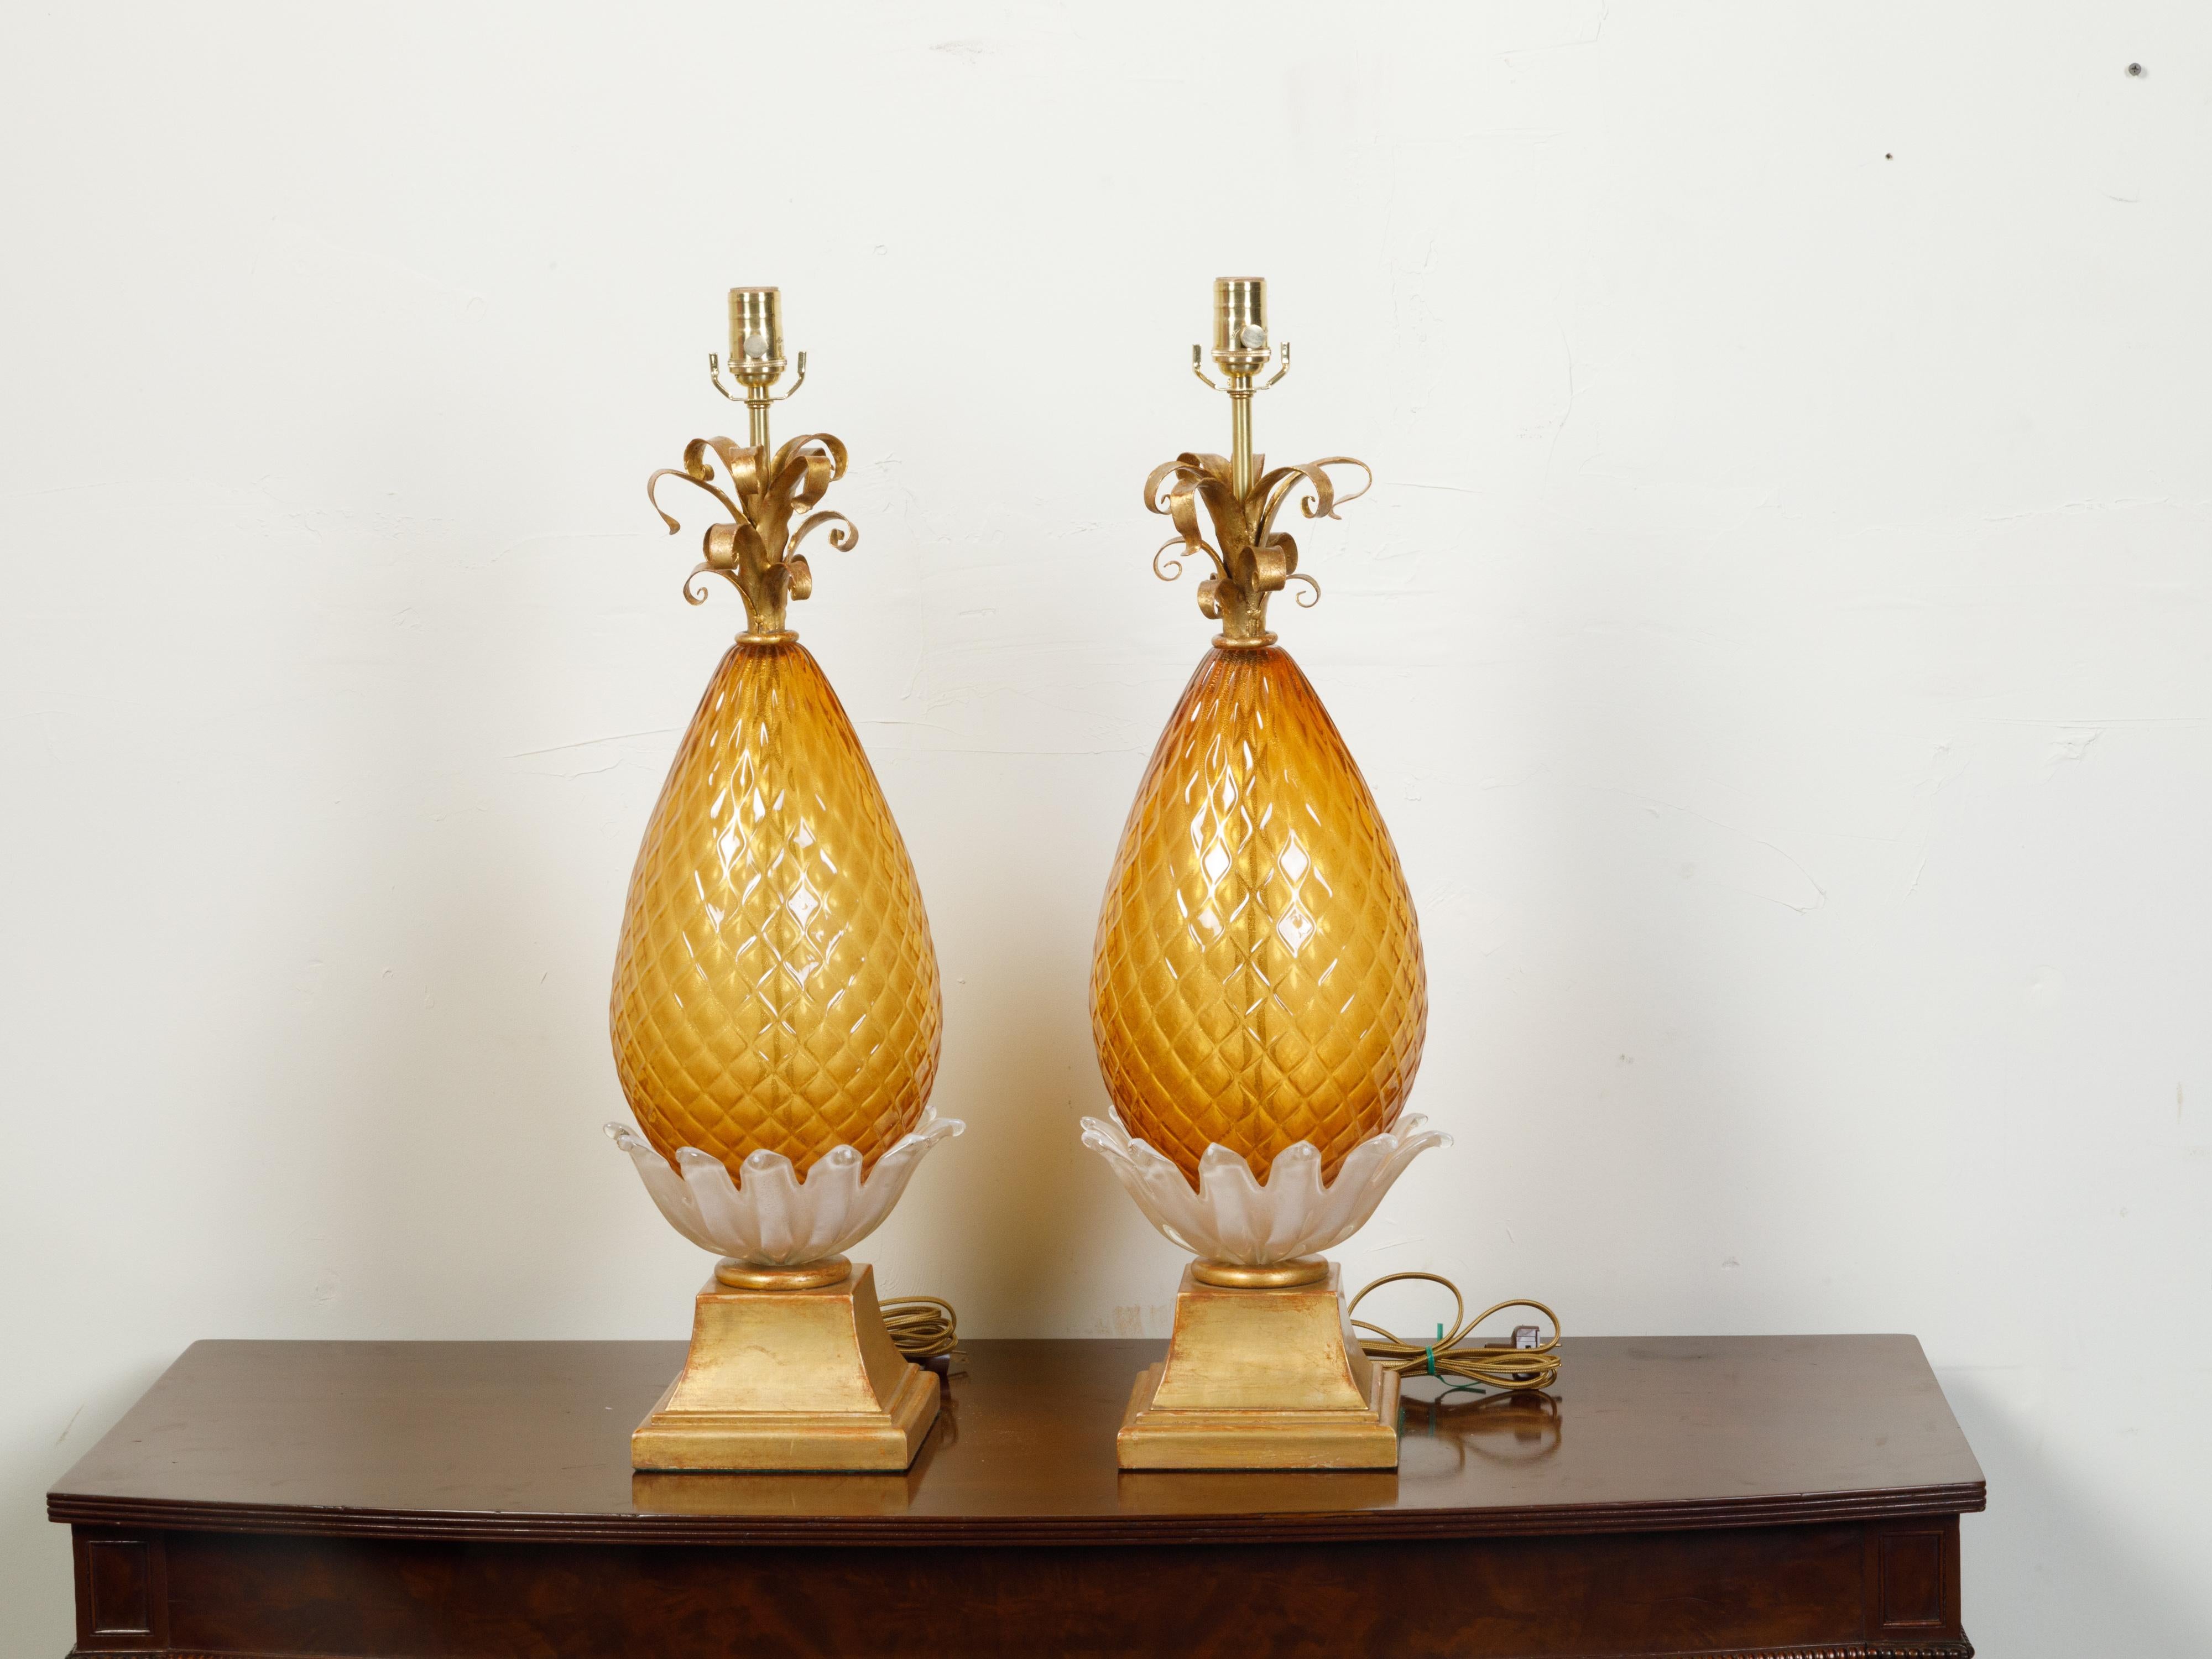 A pair of Italian Venetian Murano glass pineapple style table lamps from the 20th century, with cross-hatched motifs, gilt metal scrolls and stepped bases. Created in Murano during the 20th century, each of this pair of table lamps attracts our